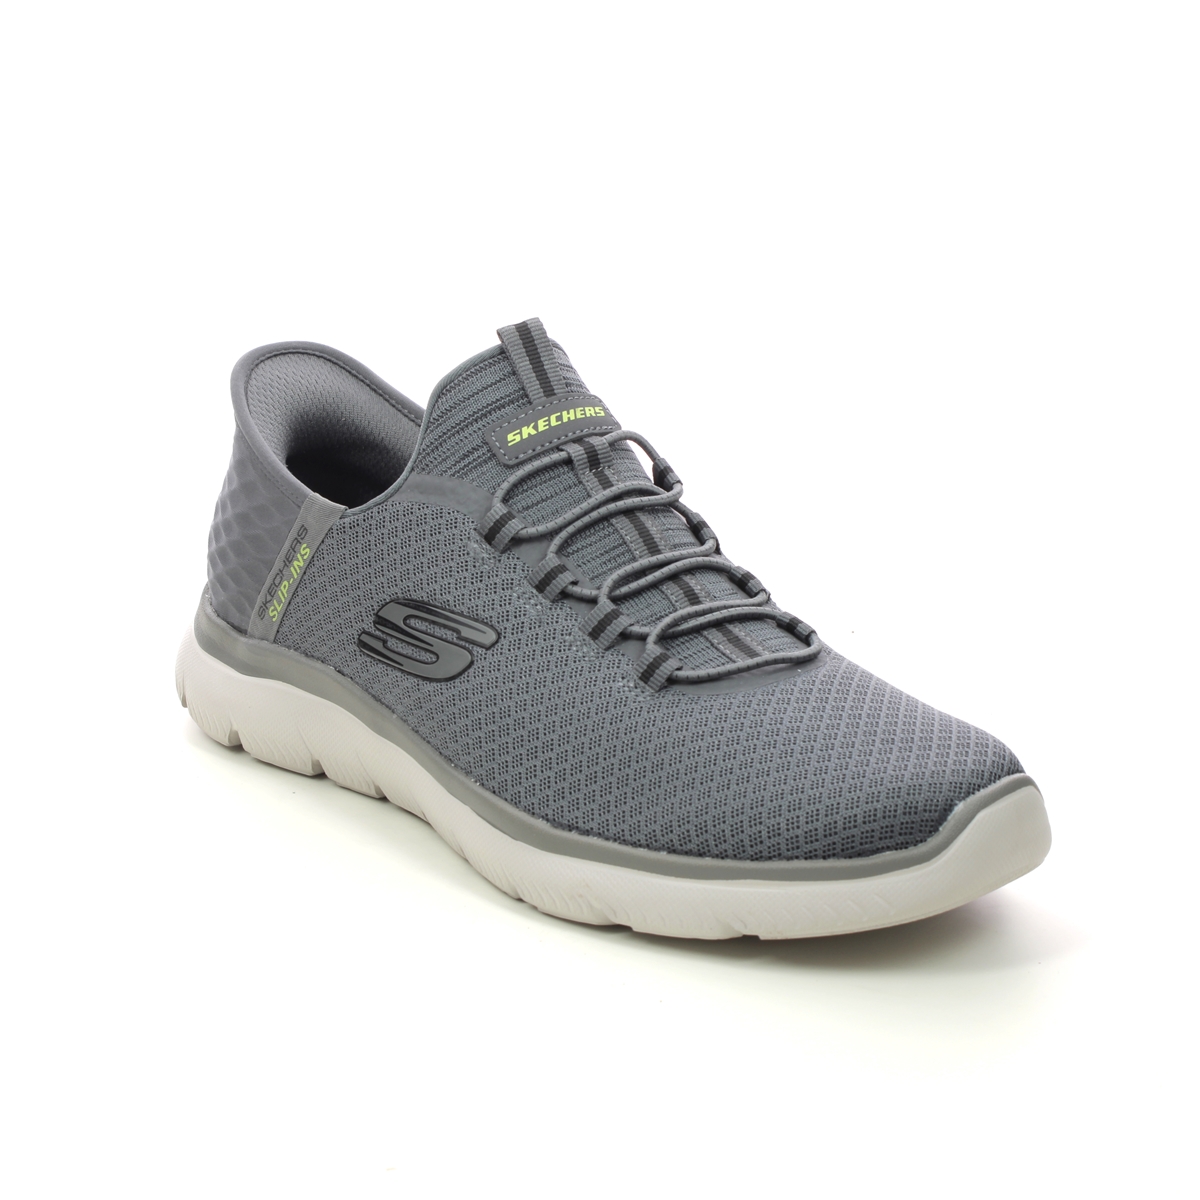 Skechers Summit Slip Ins CHAR Charcoal Mens trainers 232457 in a Plain Textile in Size 7.5